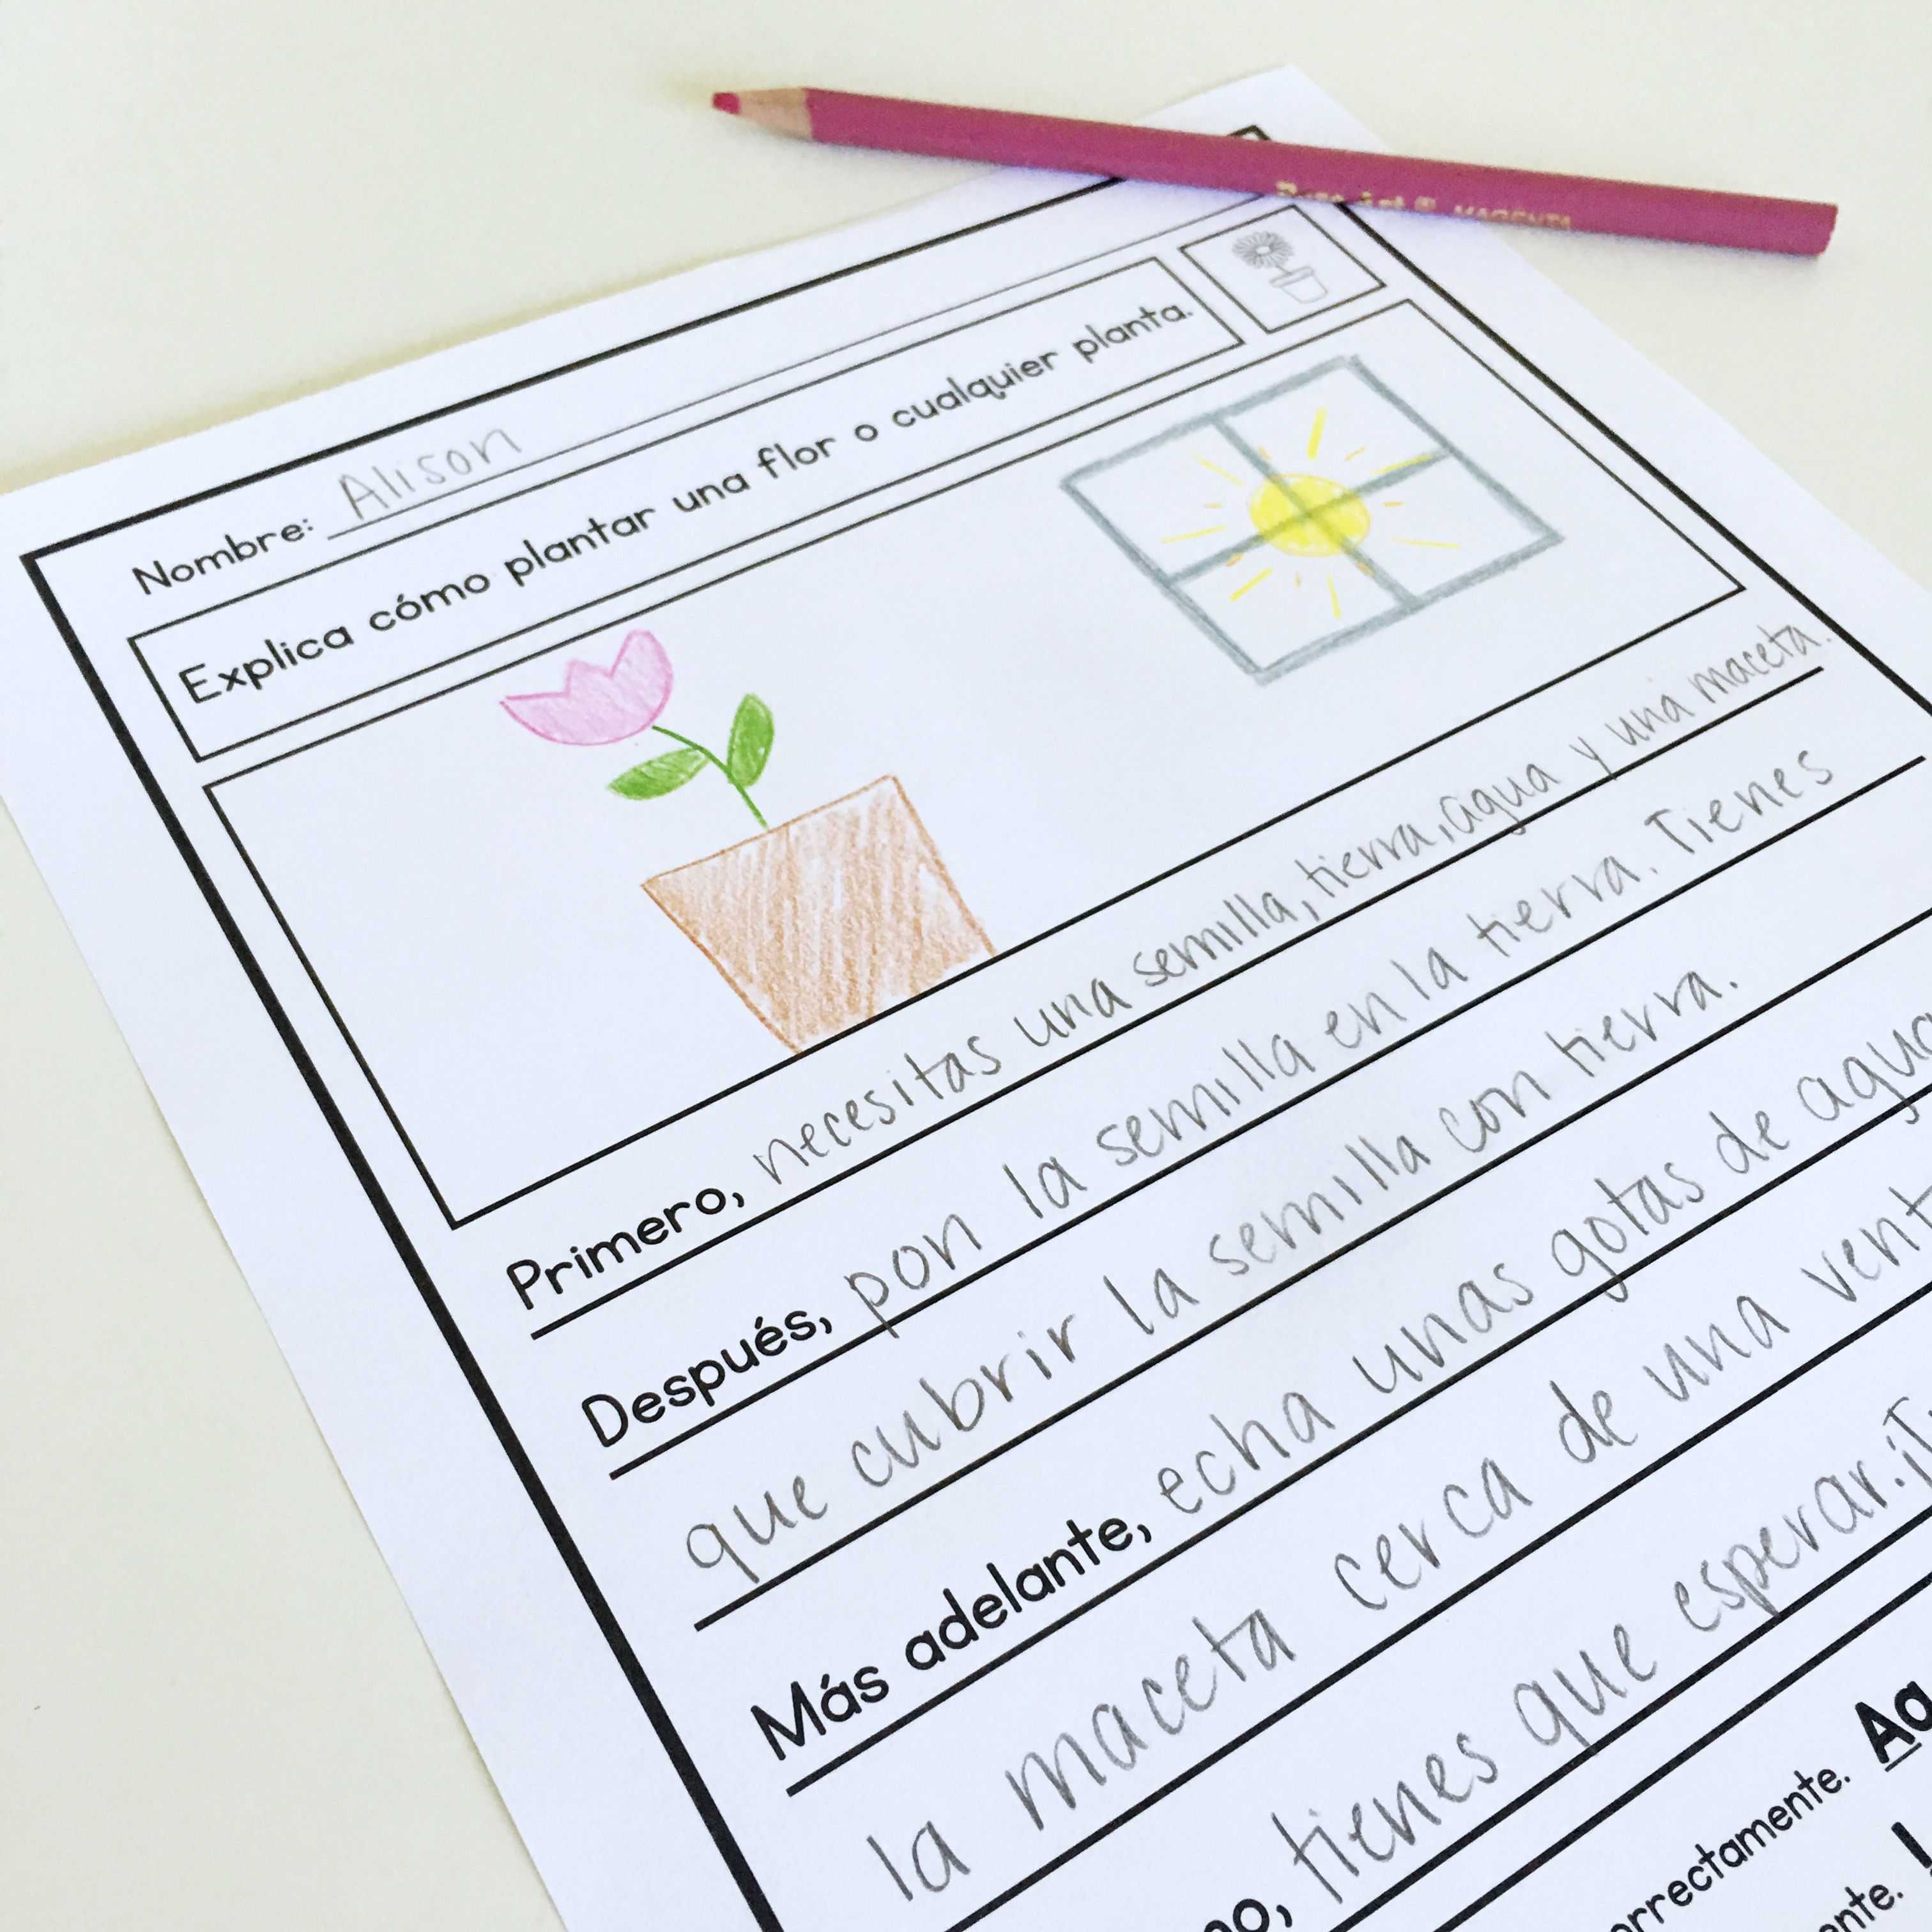 Unscramble Sentences Worksheets 1st Grade together with Spanish Writing Prompts for 1st Informational Narrative